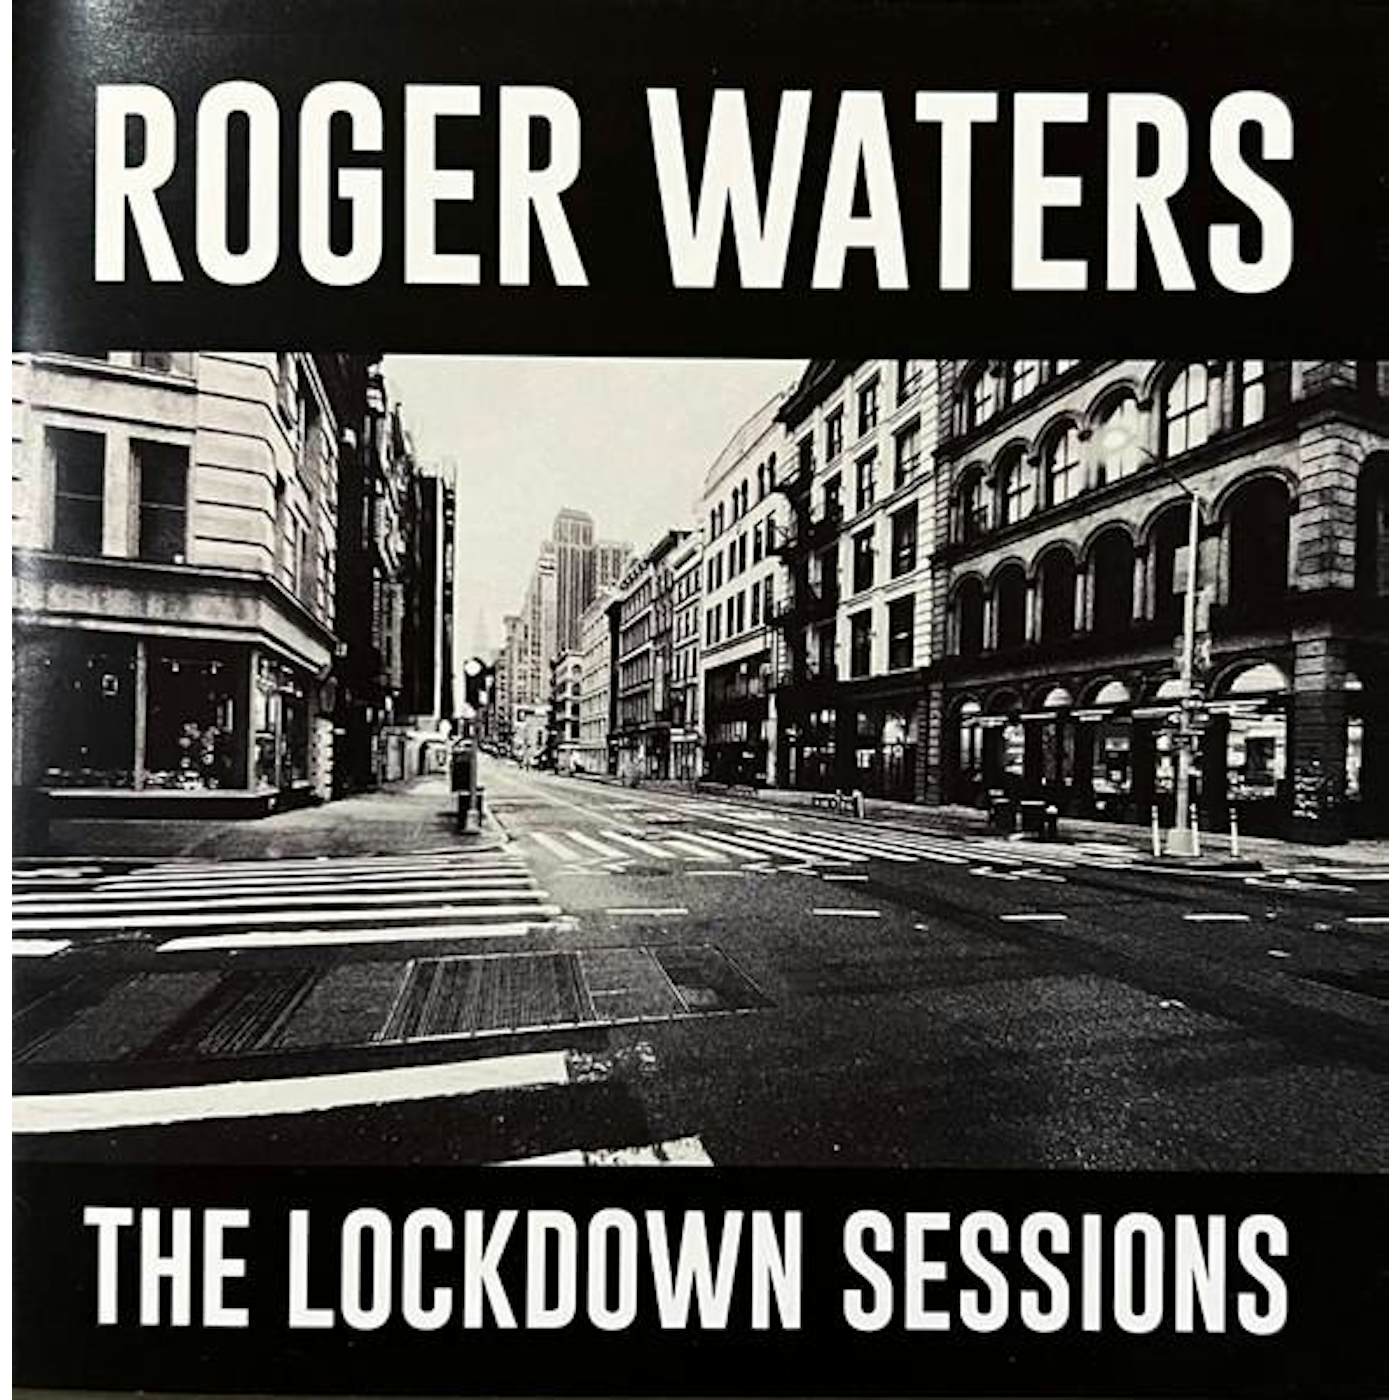 Roger Waters LOCKDOWN SESSIONS Vinyl Record